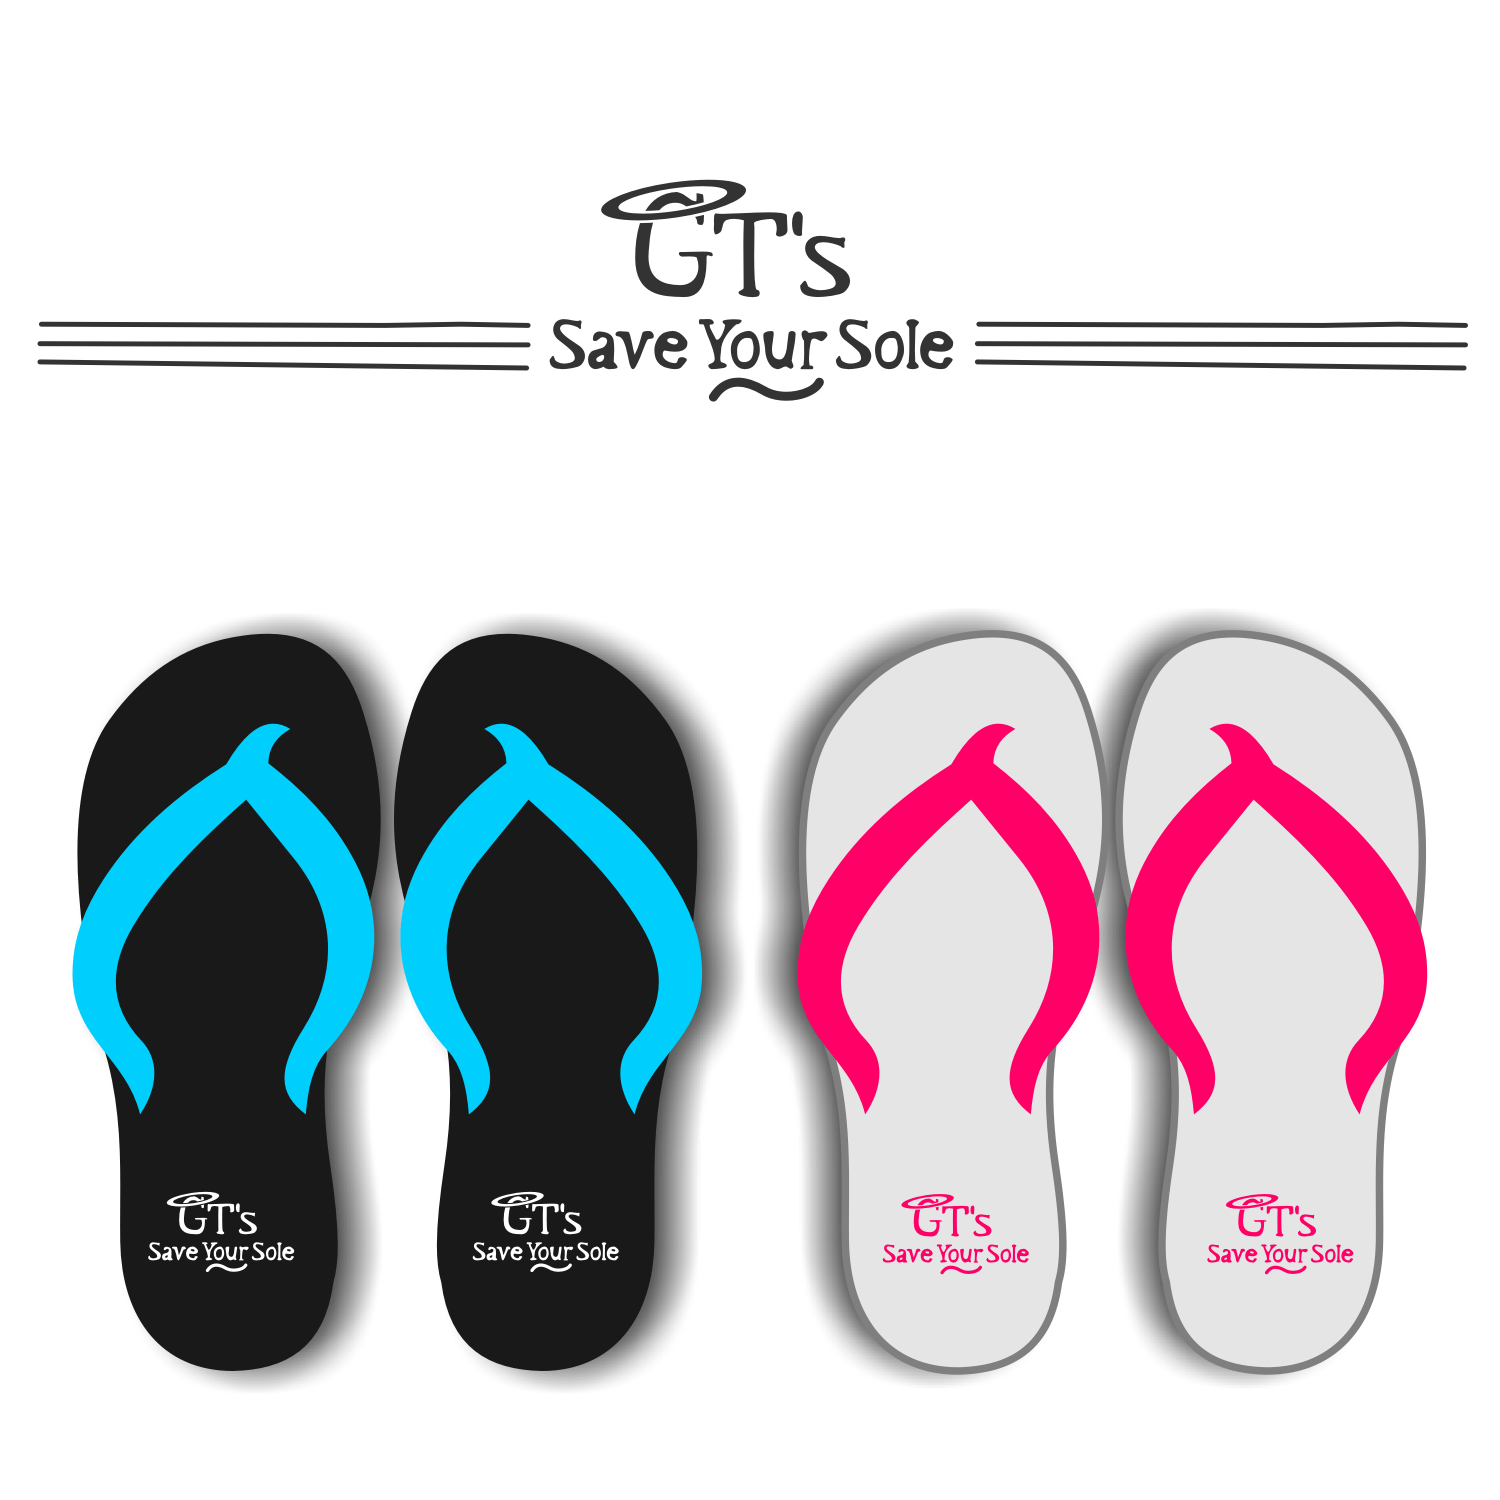 Footwear Company Logo - Elegant, Playful, It Company Logo Design for GTs Save Your Sole